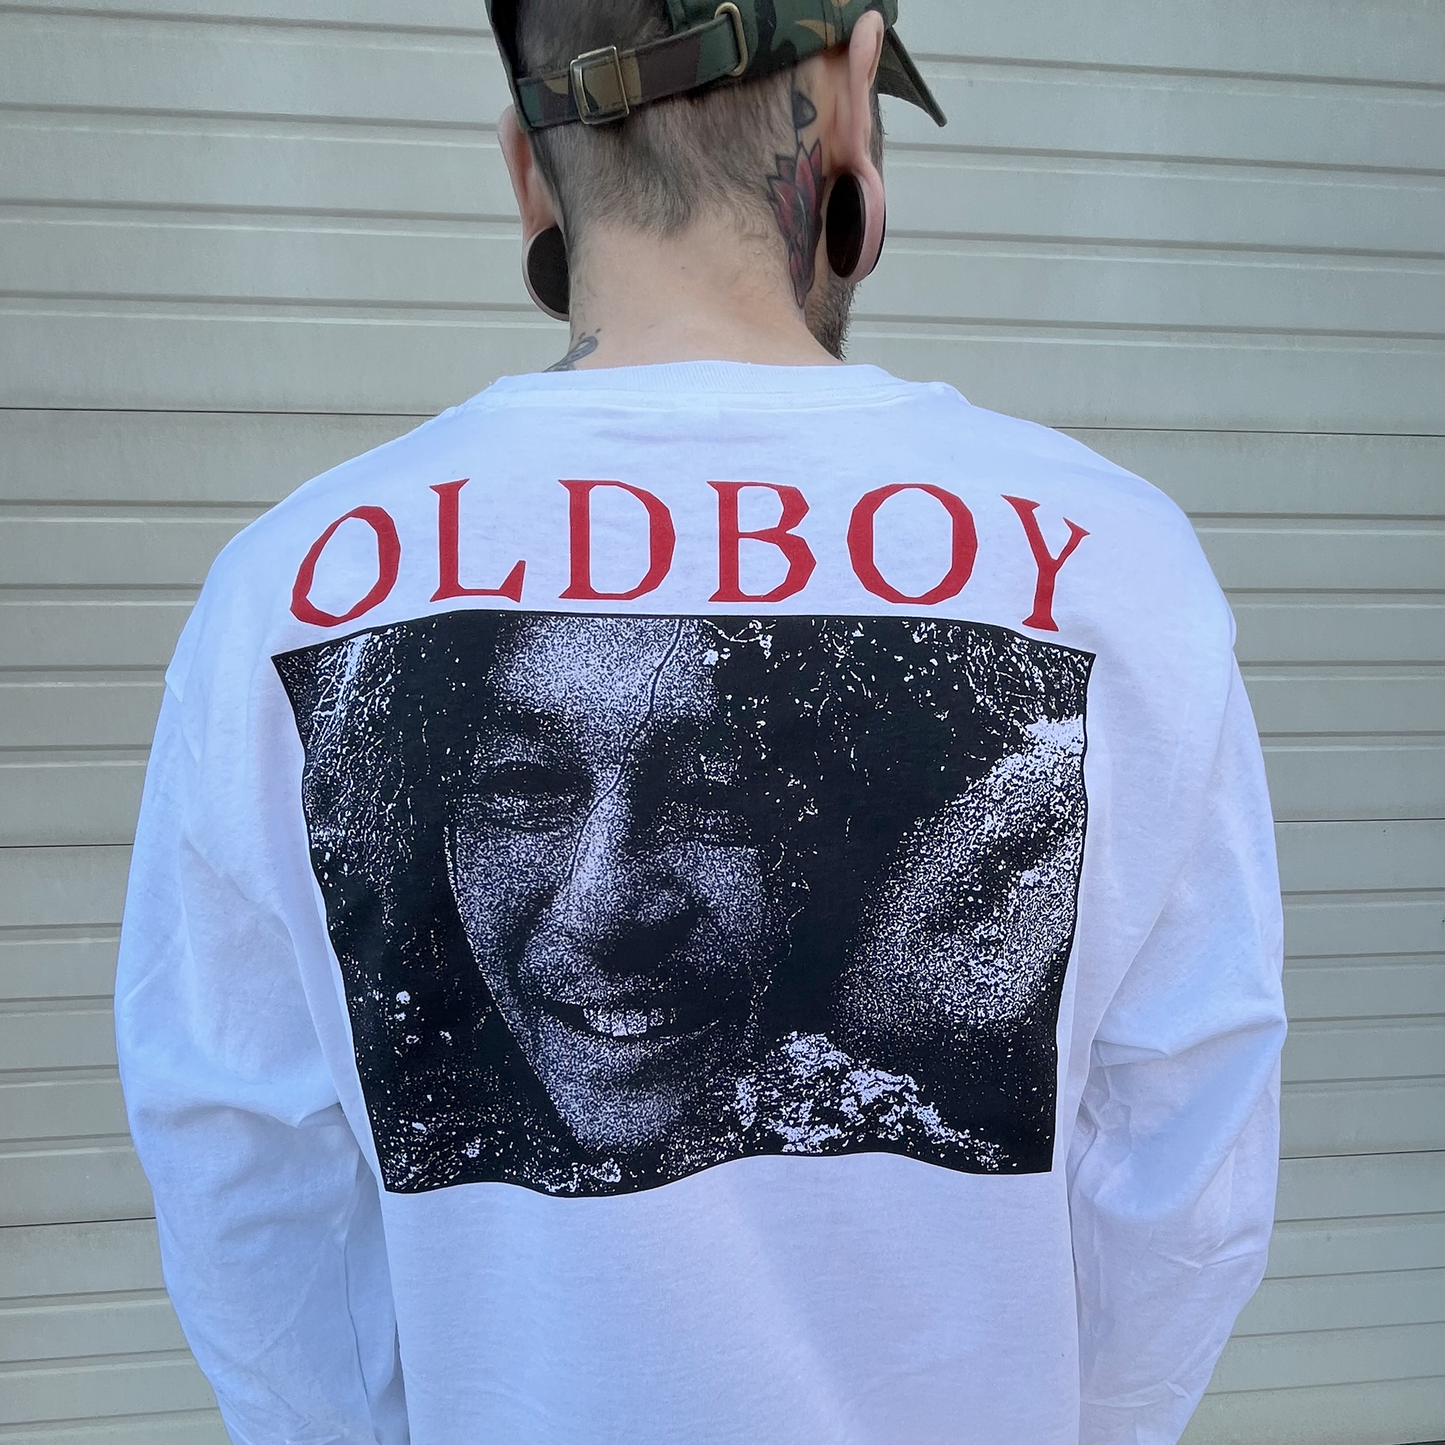 A zoomed in photo of the back of the shirt being worn by a model. "Oldboy" is printed in red across the shoulder blades. The text is large and centered over a highly stylized halftone newspaper print photo of the main character.